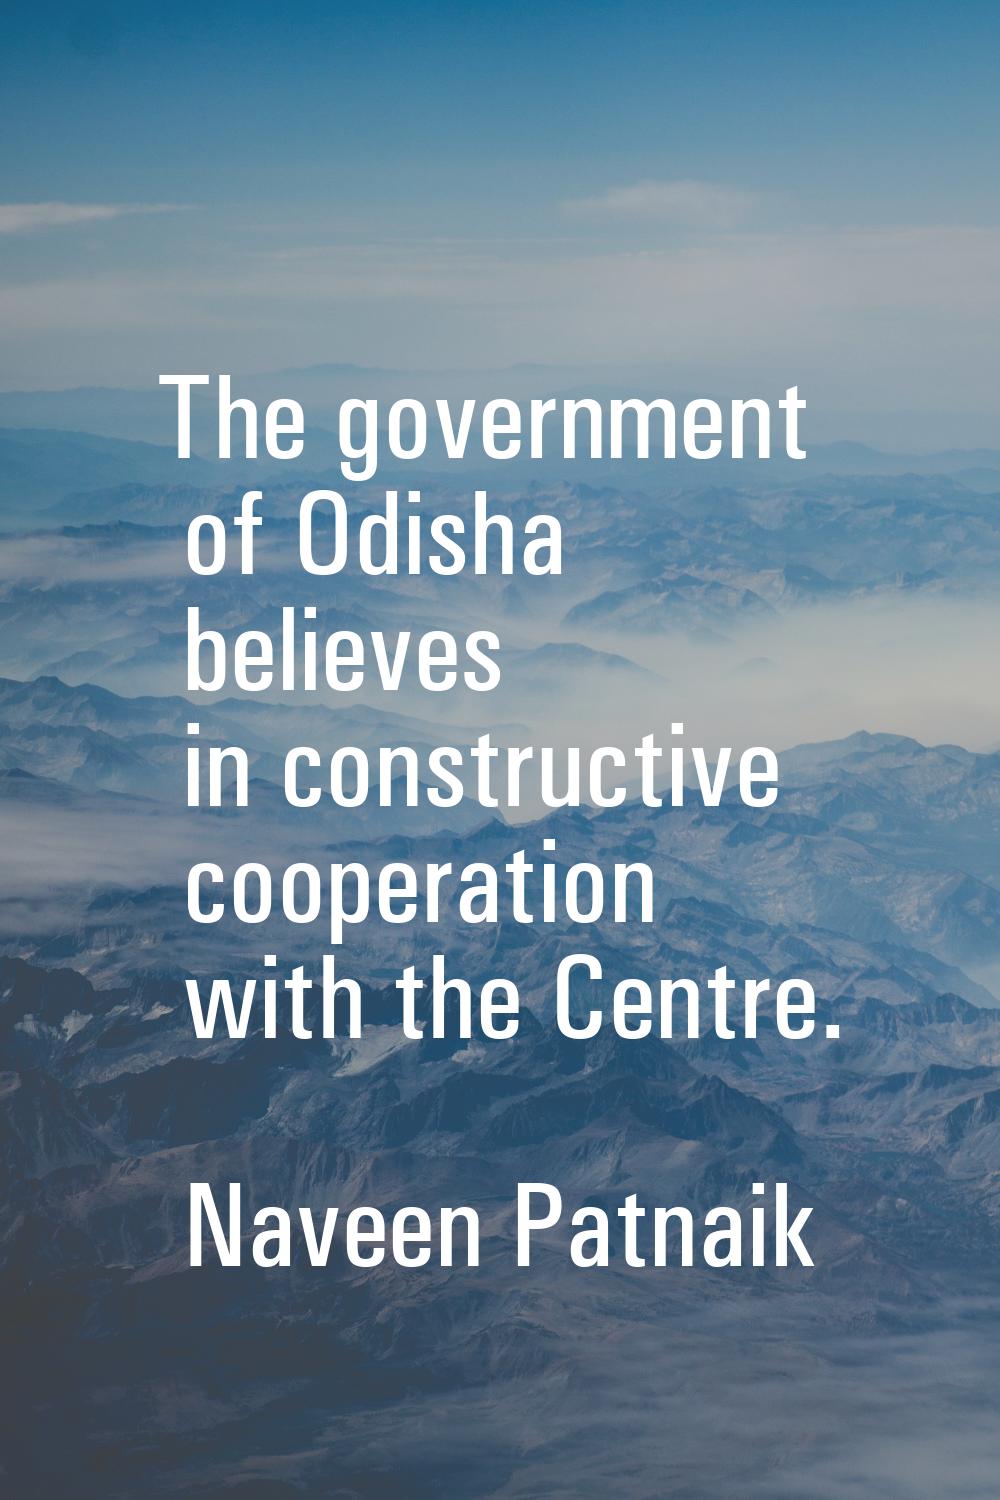 The government of Odisha believes in constructive cooperation with the Centre.